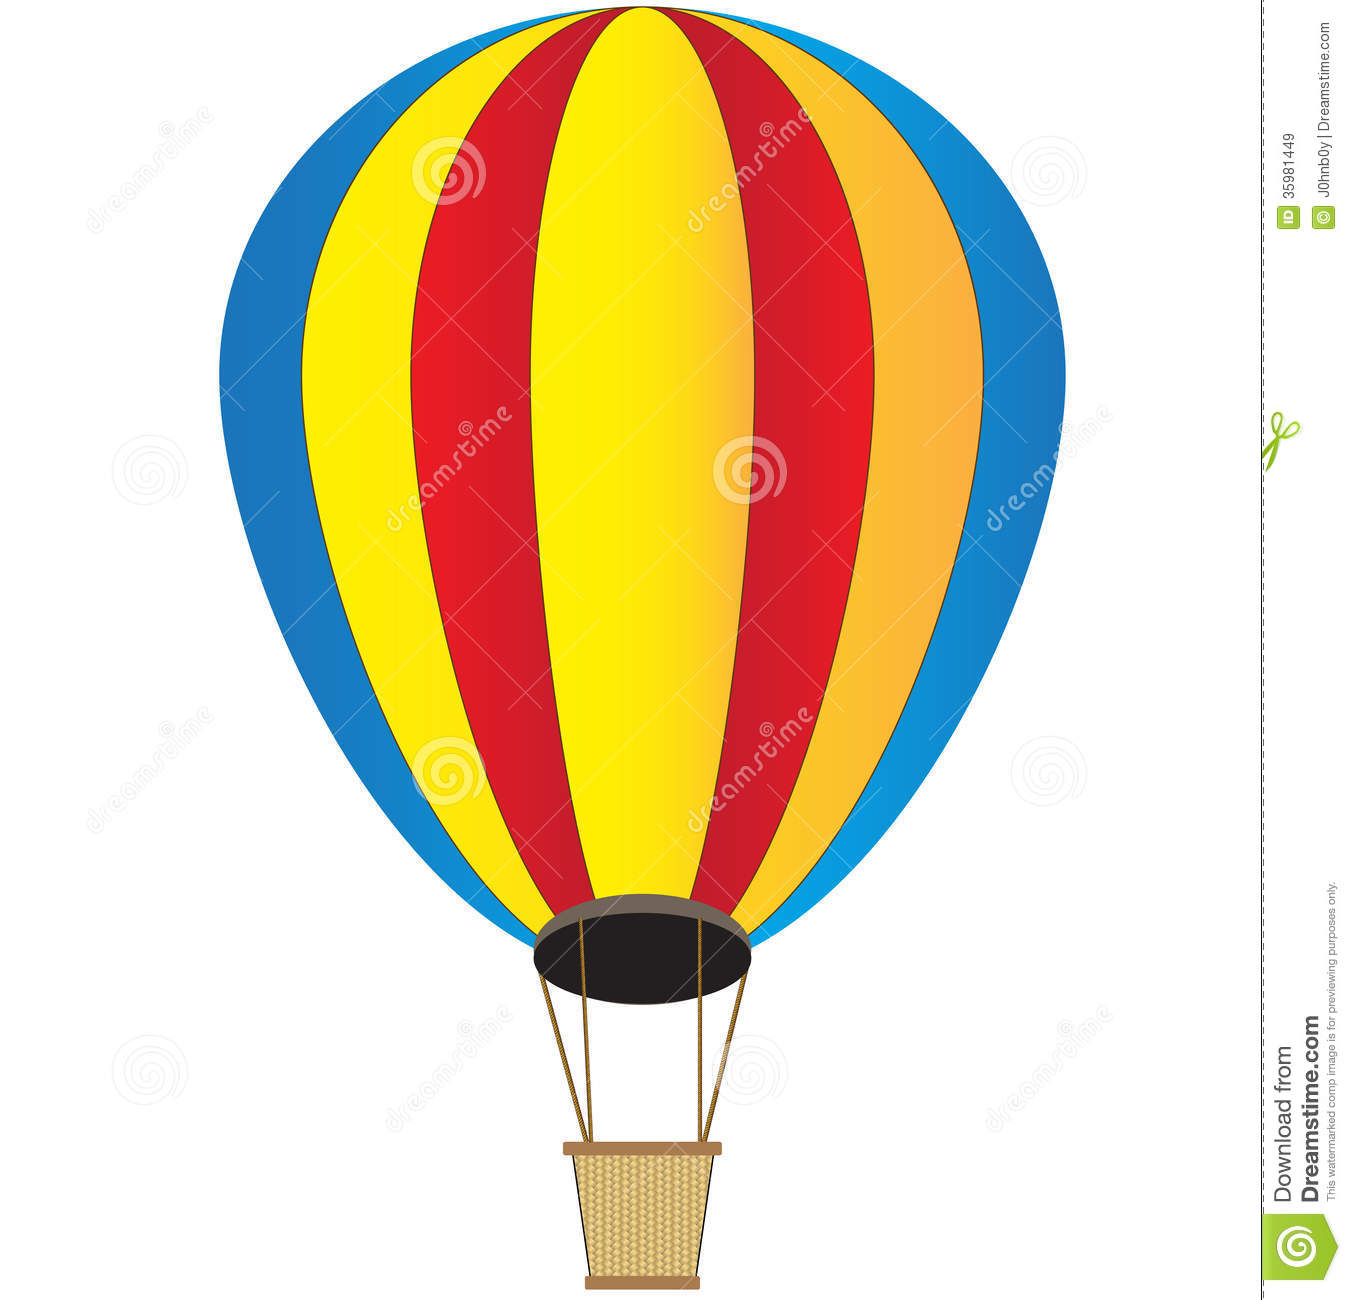 1000  images about HOT AIR BA